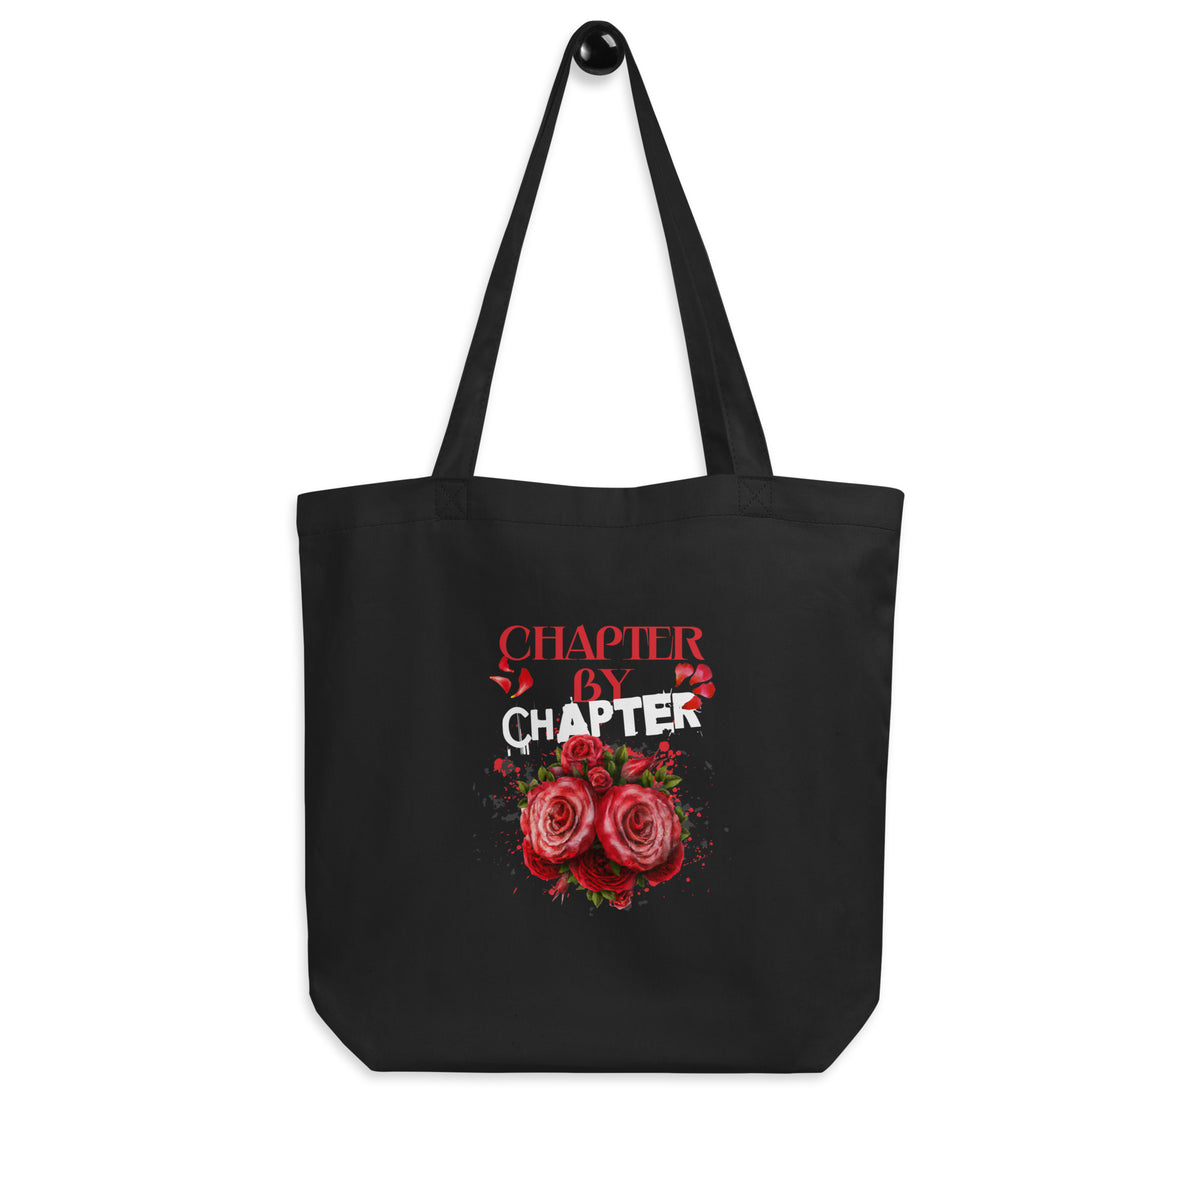 Chapter by Chapter Tote Bag